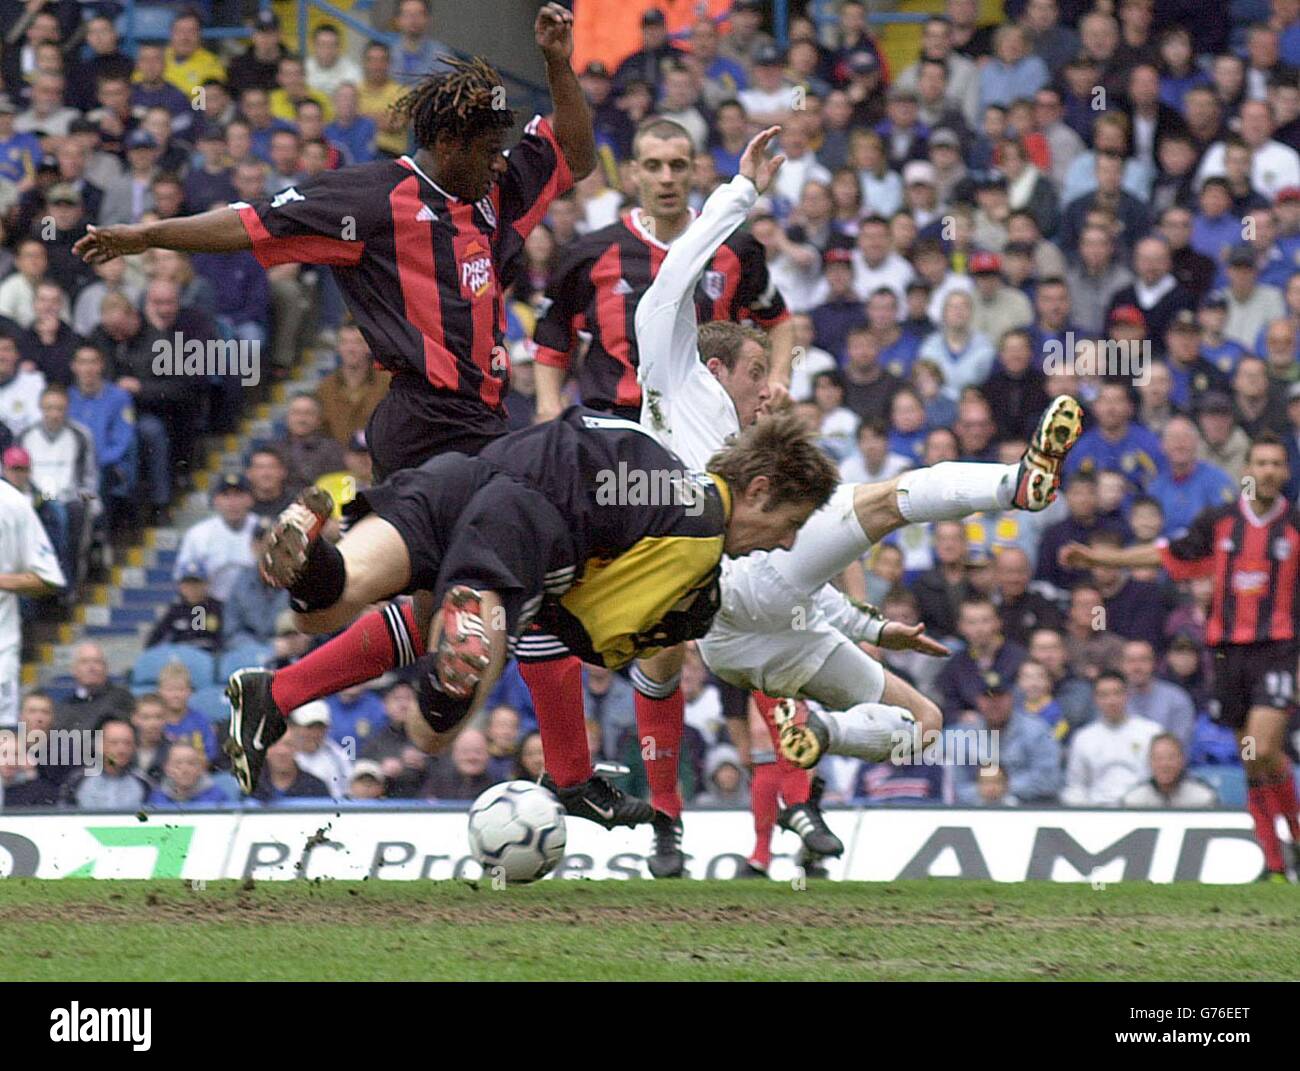 Leeds midfielder Lee Bowyer (centre) makes a desperate attempt to beat Fulham goalkeeper Edwin Van Der Sar during their FA Barclaycard Premiership match at Leeds' Elland Road ground. Stock Photo